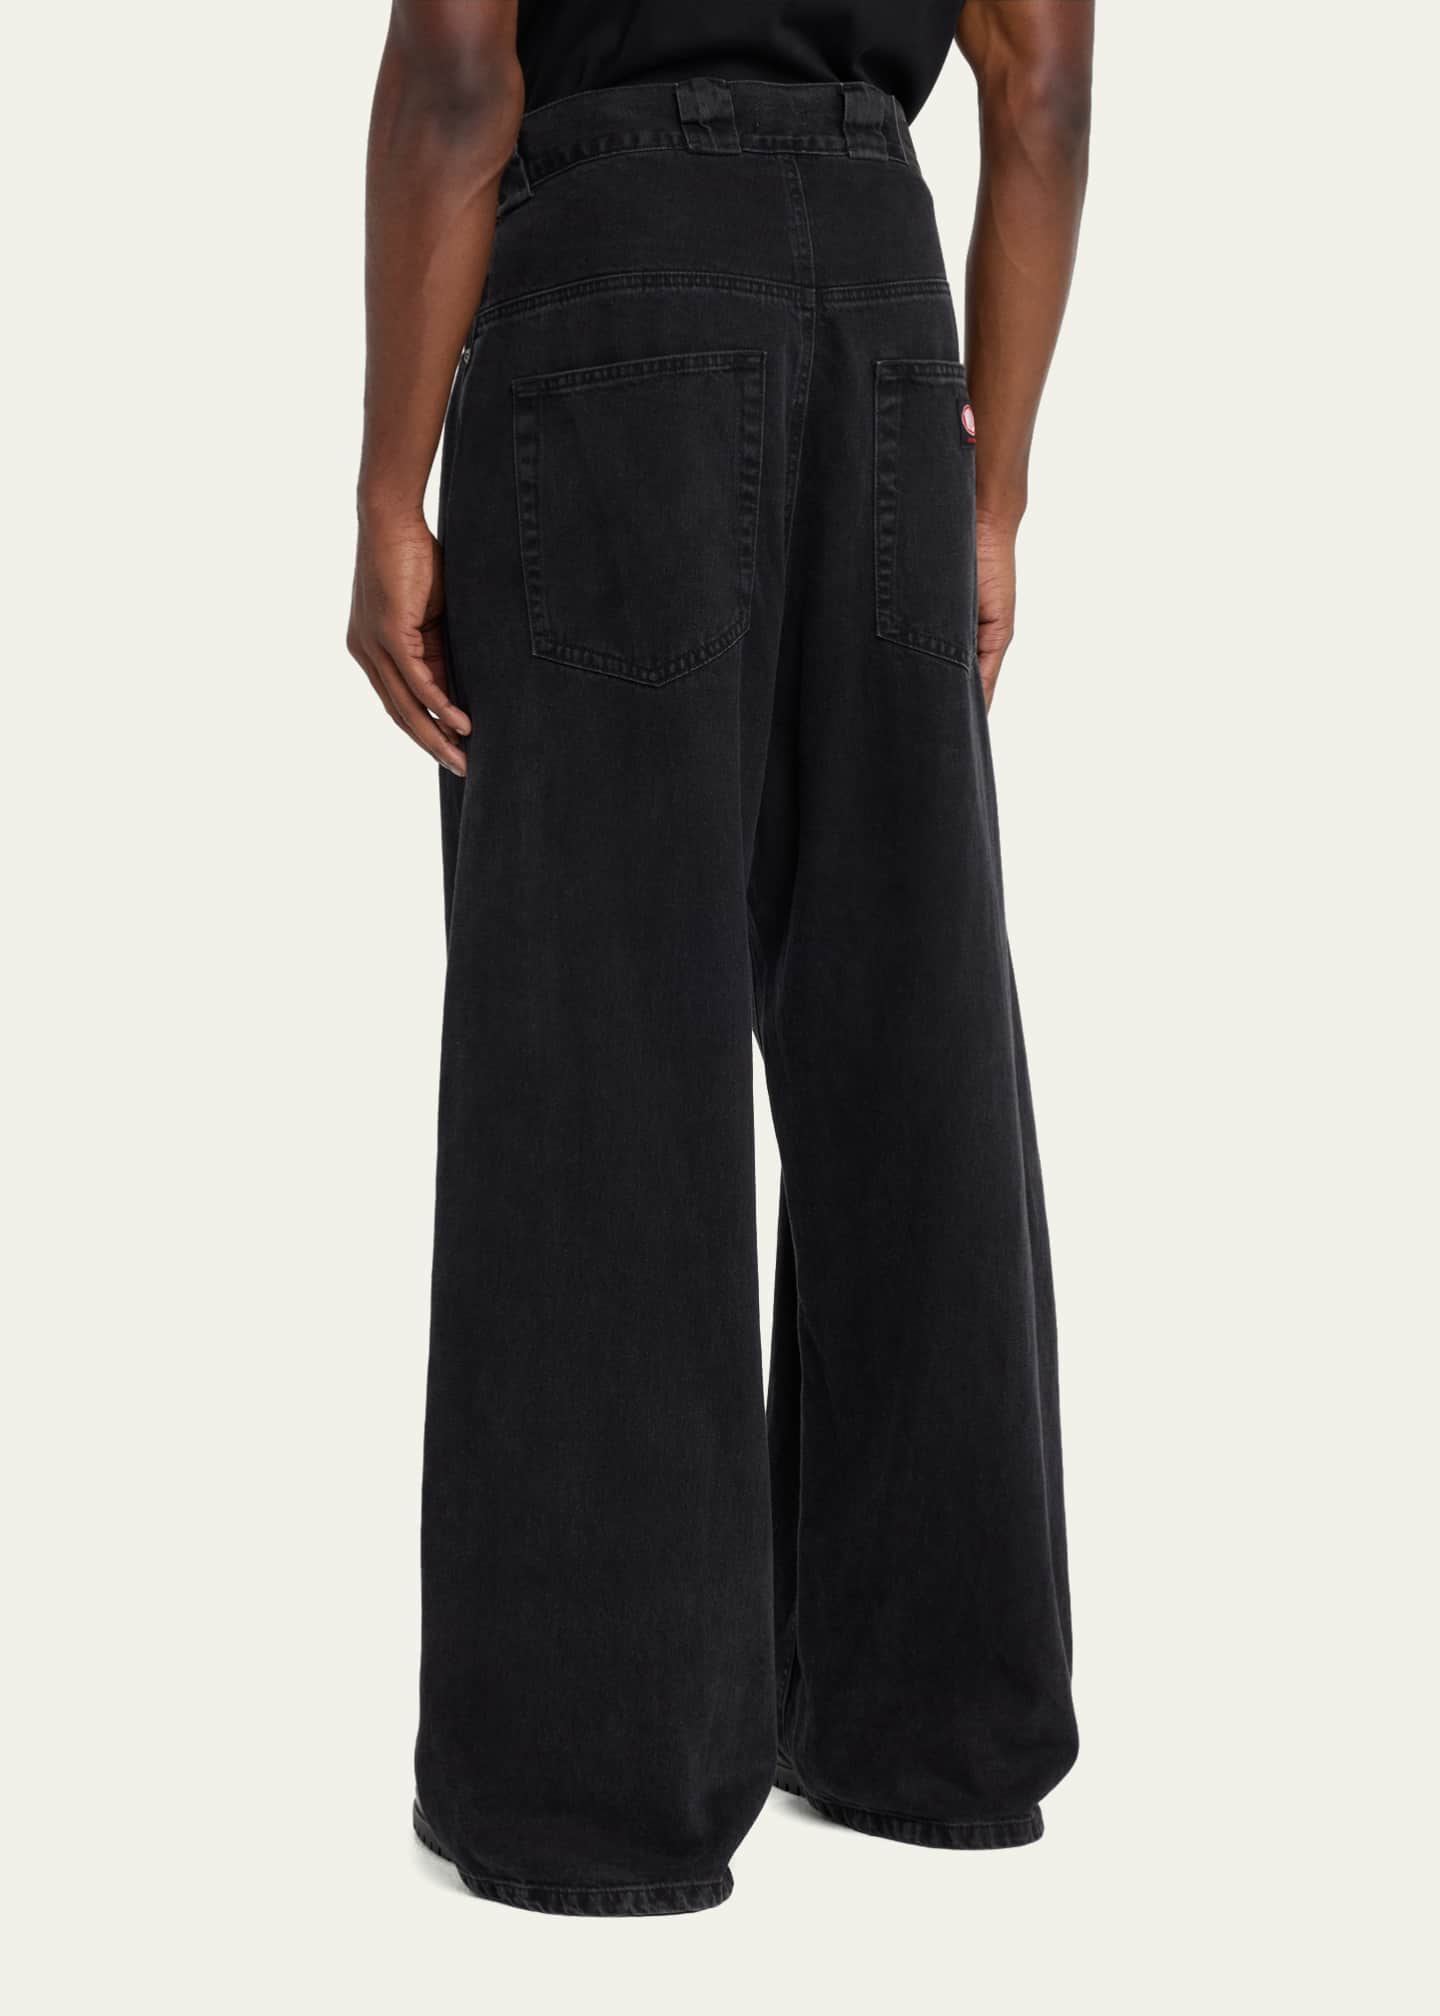 Willy Chavarria Men's Chachi Wide-Leg Jeans - Bergdorf Goodman